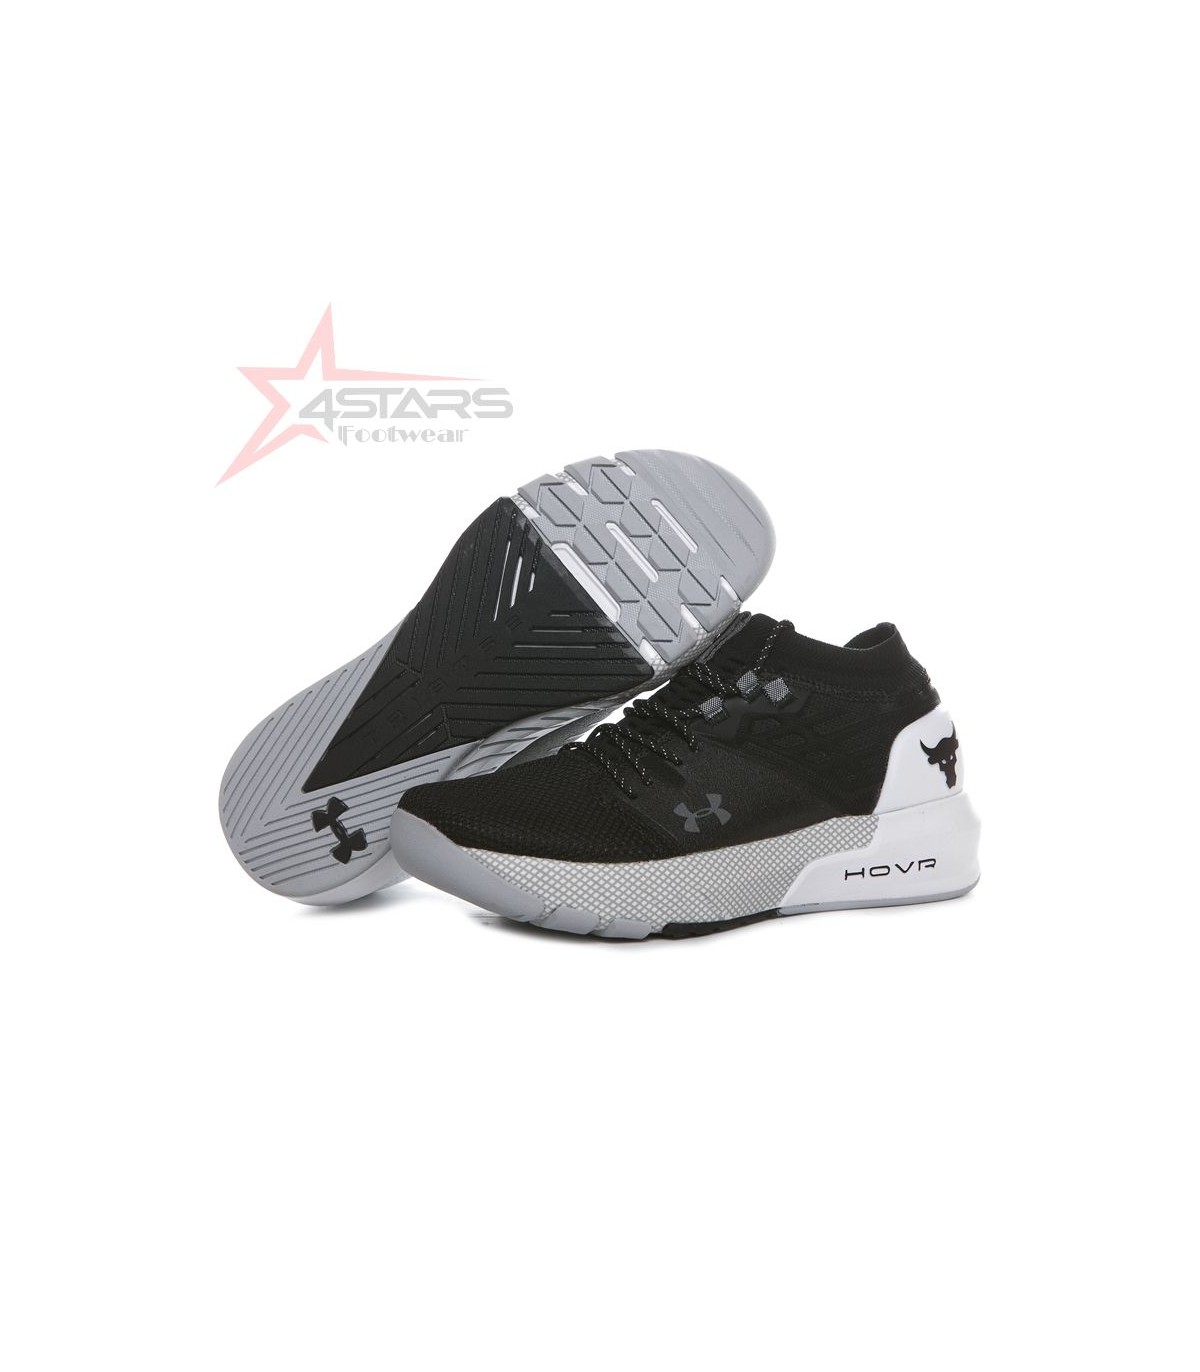 Under Armour Project Rock 2 - Black/White